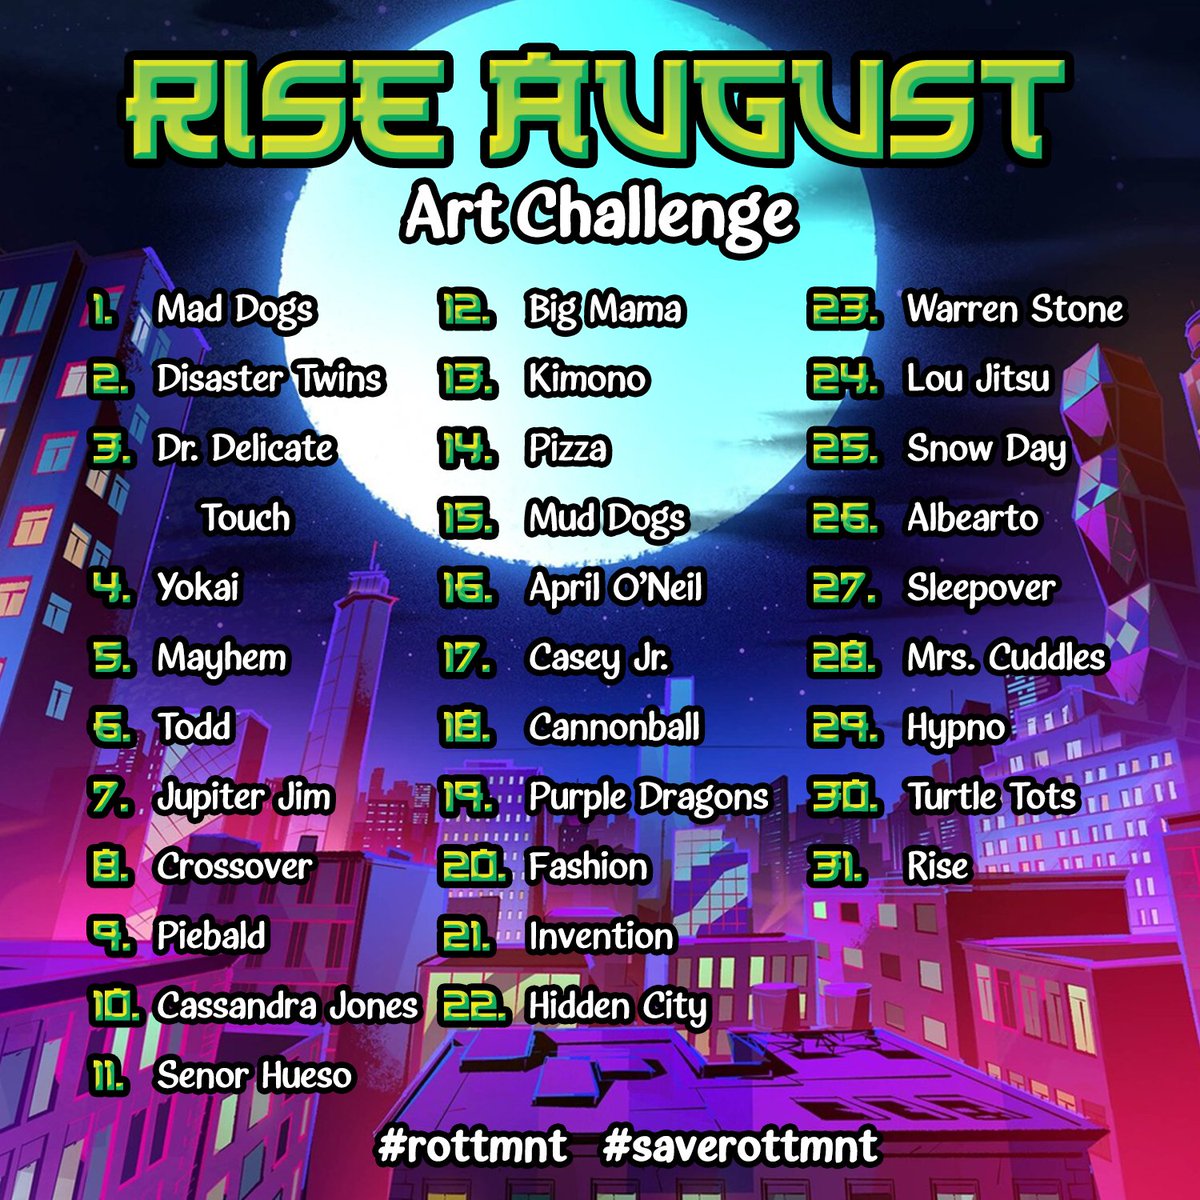 know, I know we’re only in July but… I'm hosting a Rise TMNT art challenge this August! #riseaugust #rottmnt #saverottmnt #riseseason3 #saveriseofthetmnt #RiseoftheTMNT 

See the replies for more info.